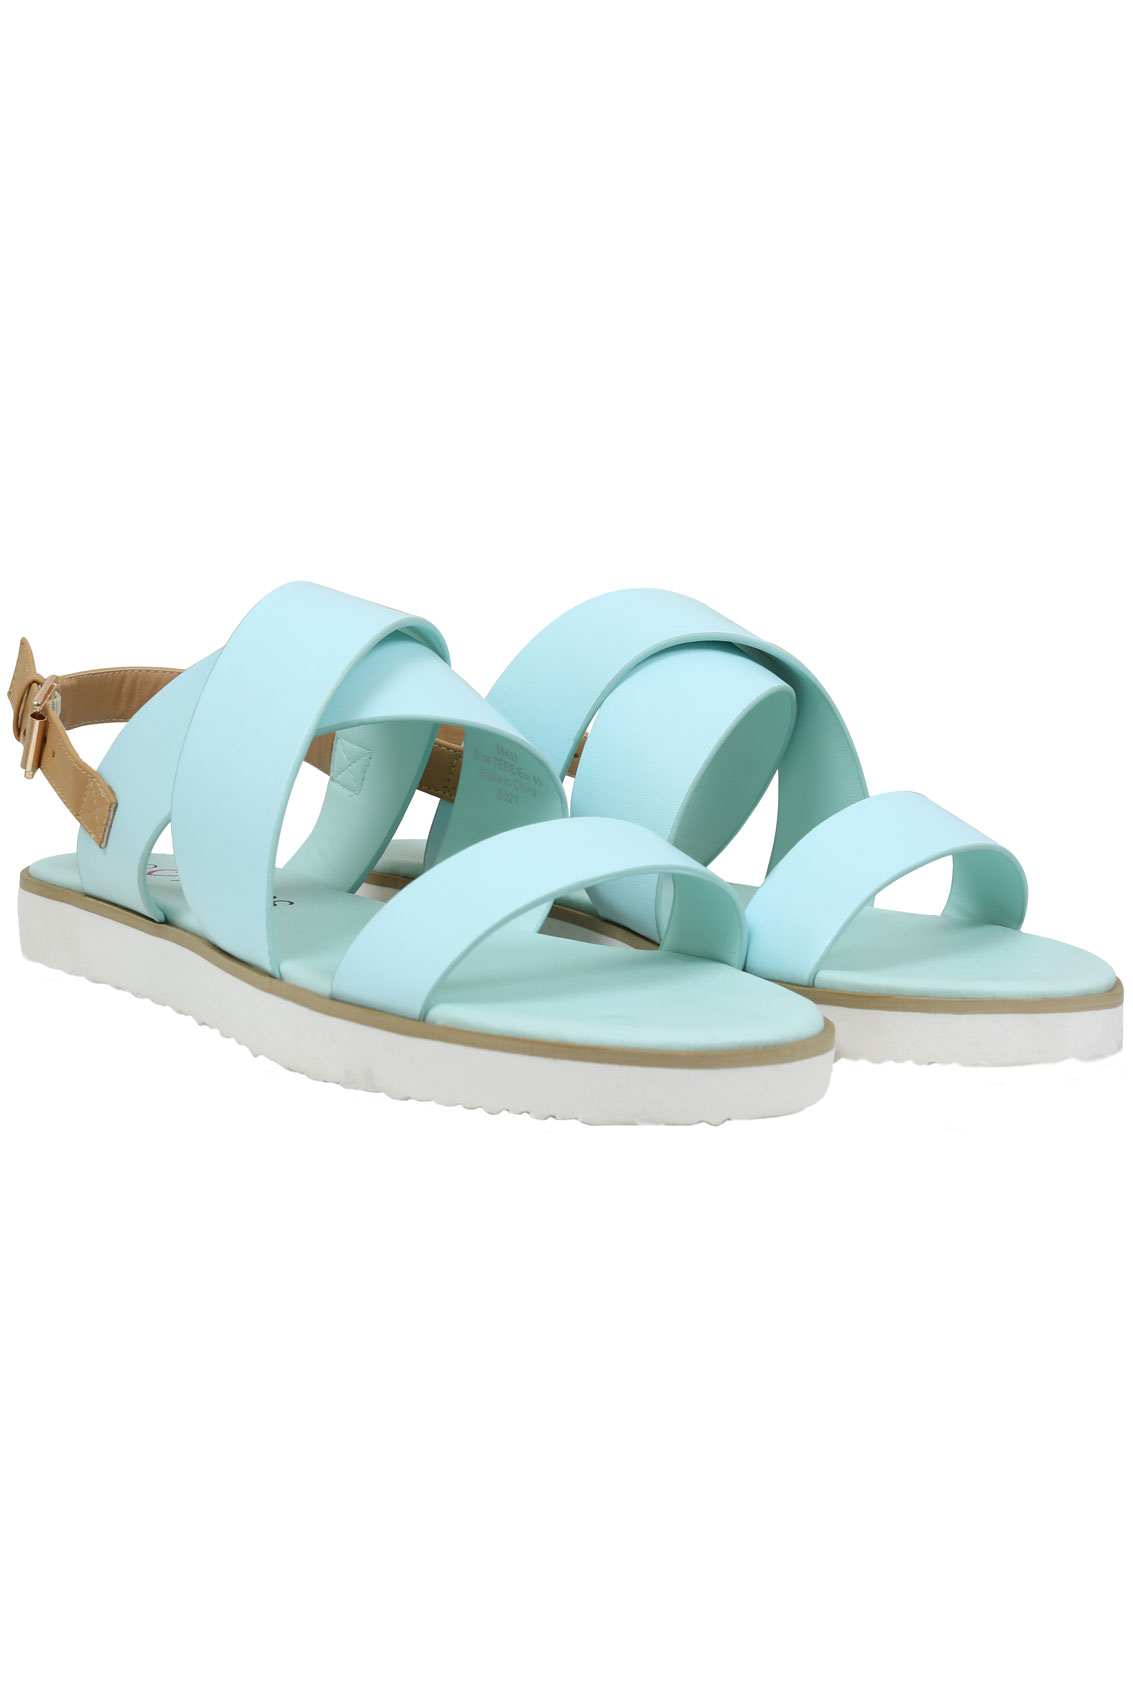 Mint Three Strap Flat Sandals With Contrast Back Strap In EEE Fit 4EEE